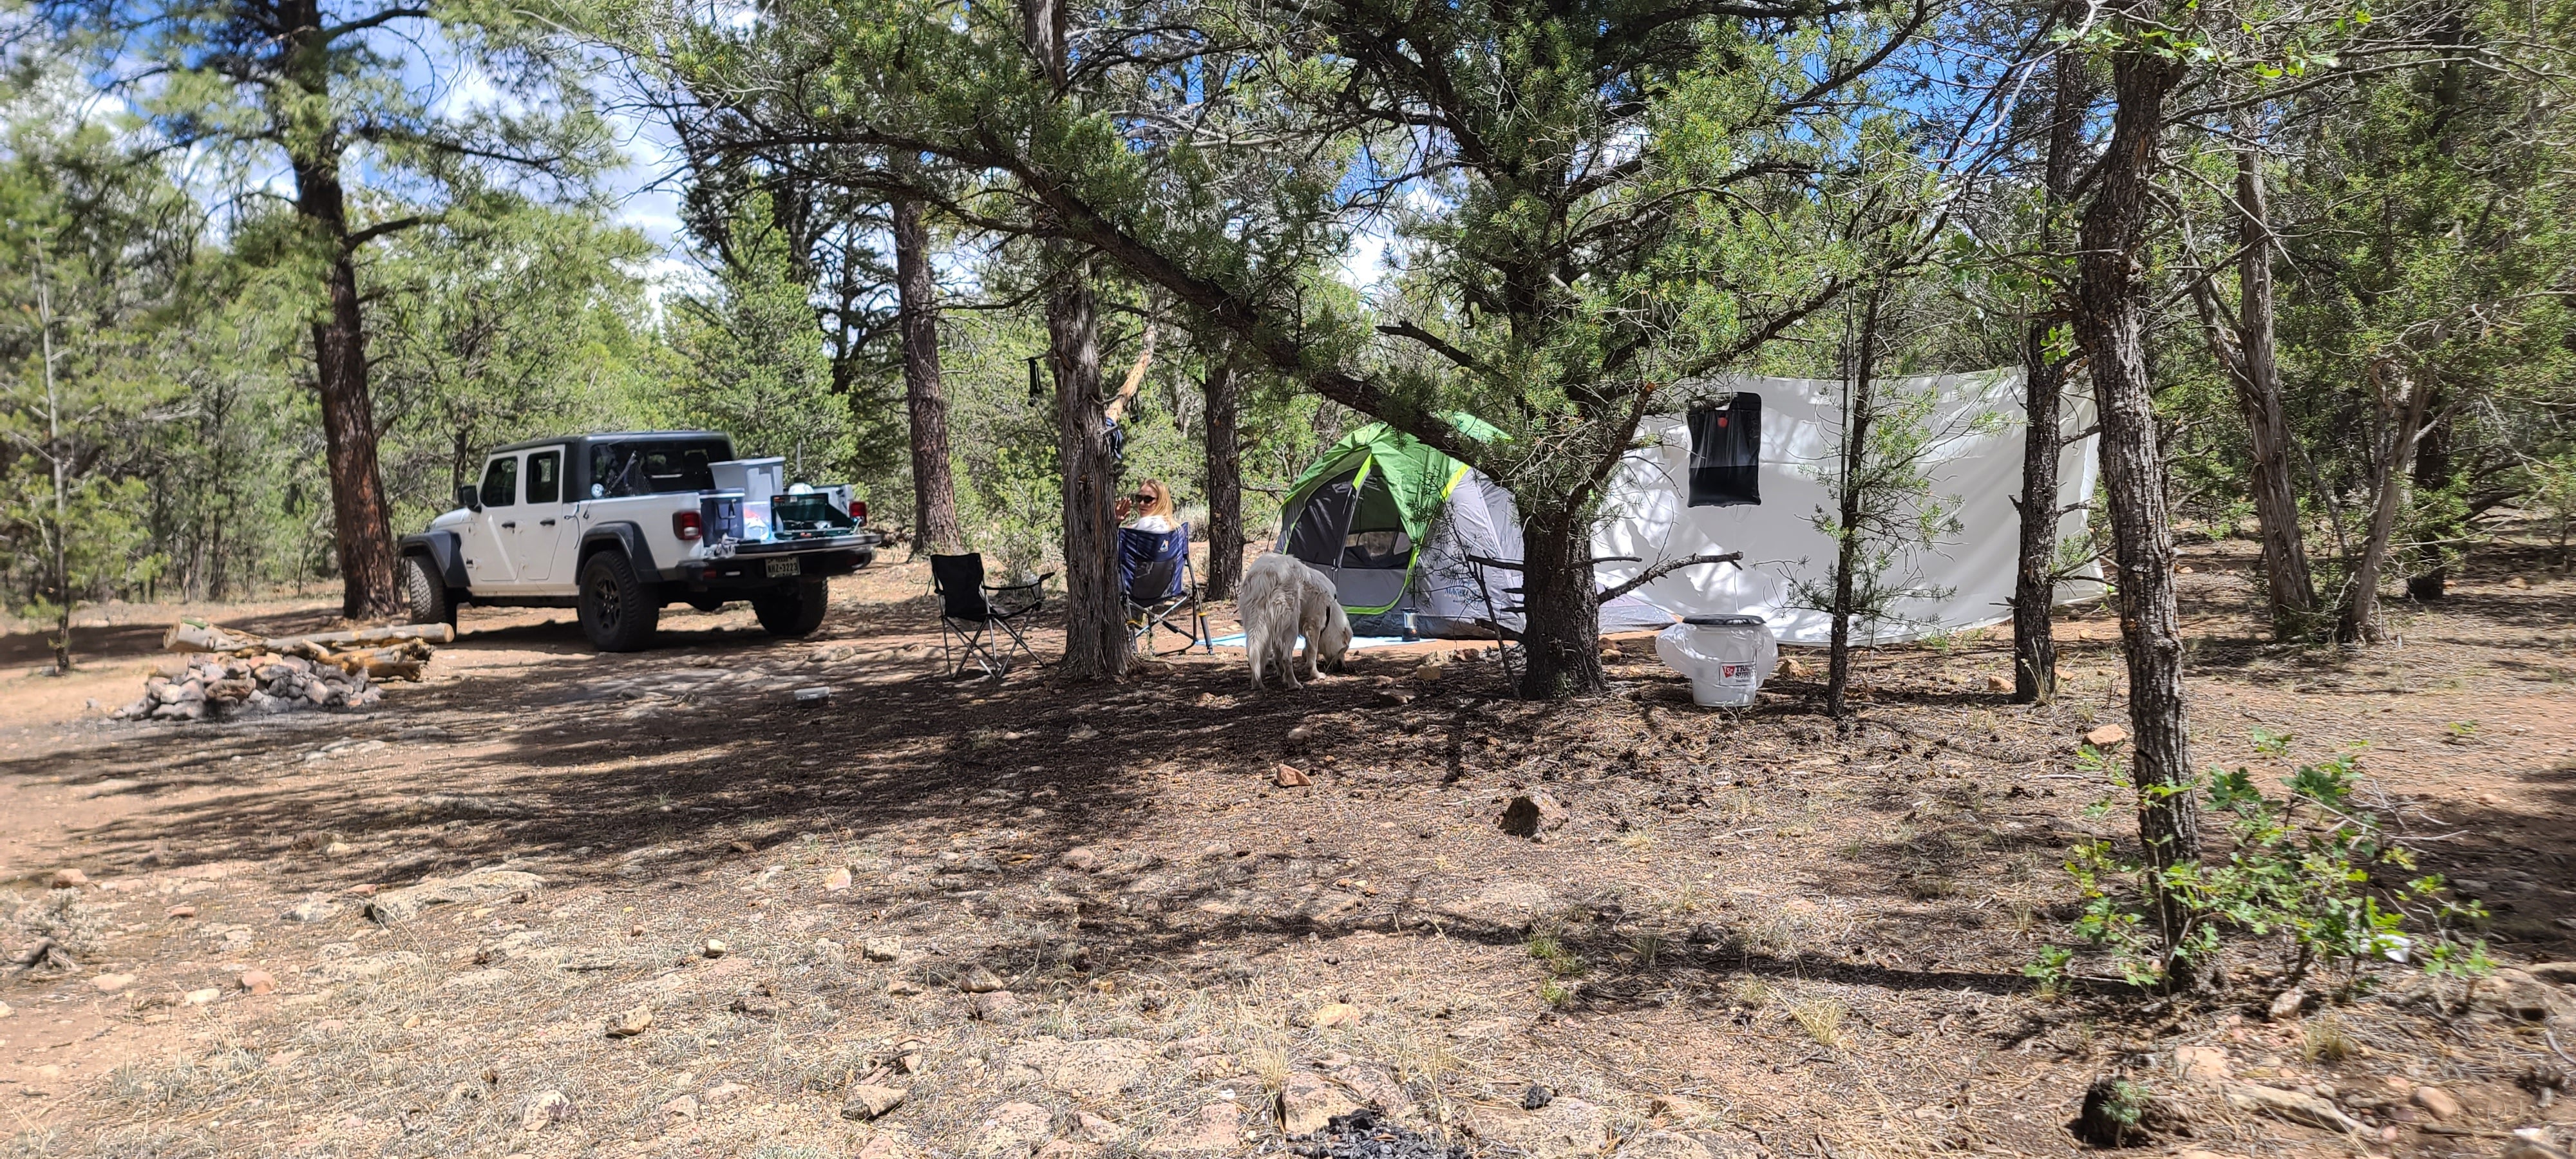 Camper submitted image from FR 306 Dispersed Camping  - 1